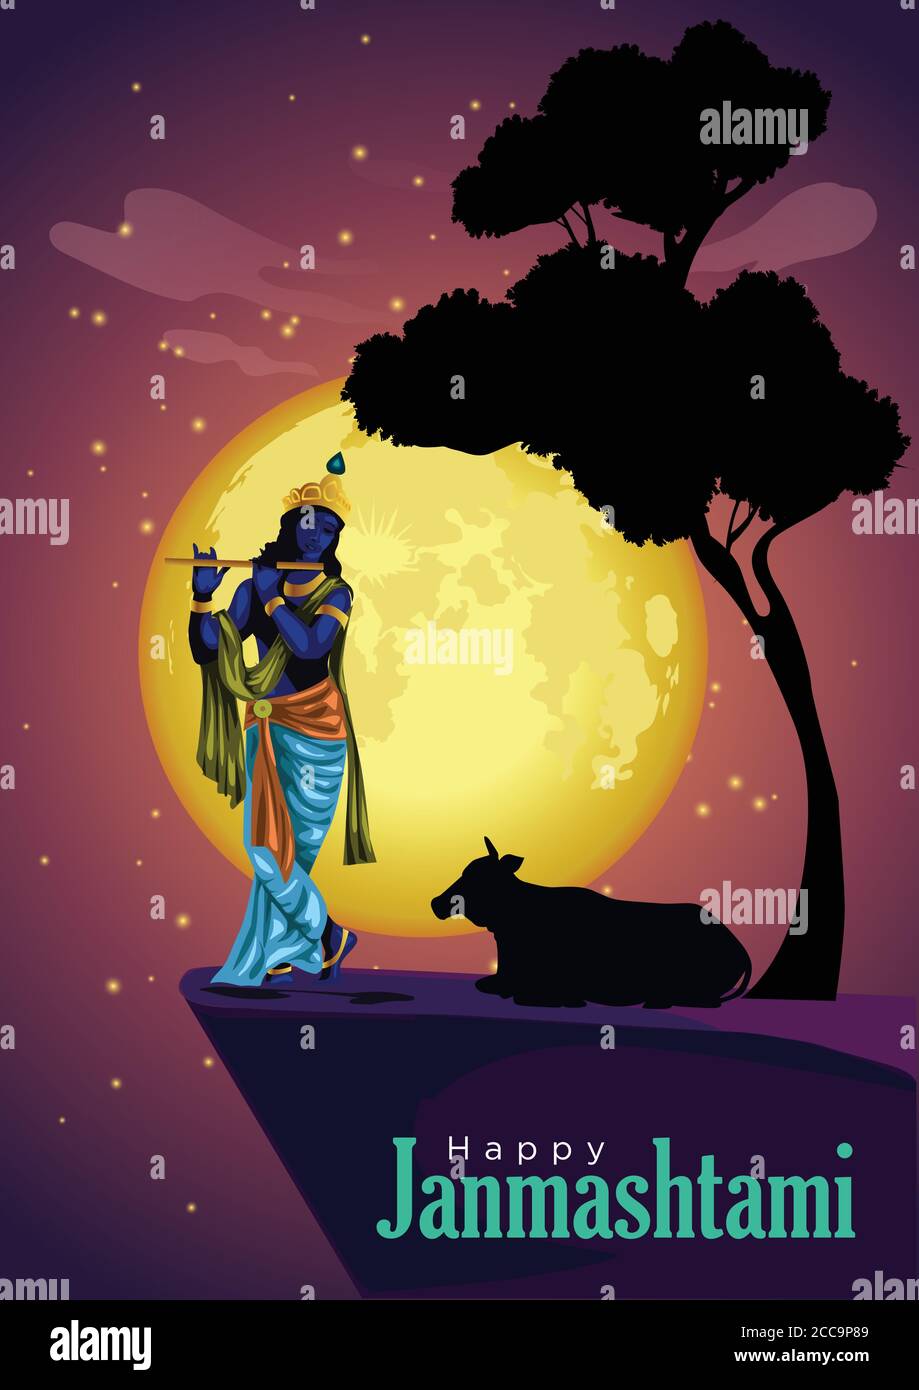 Lord Krishna playing flute , with night background.vector illustration of Happy Janmashtami festival of India Stock Vector